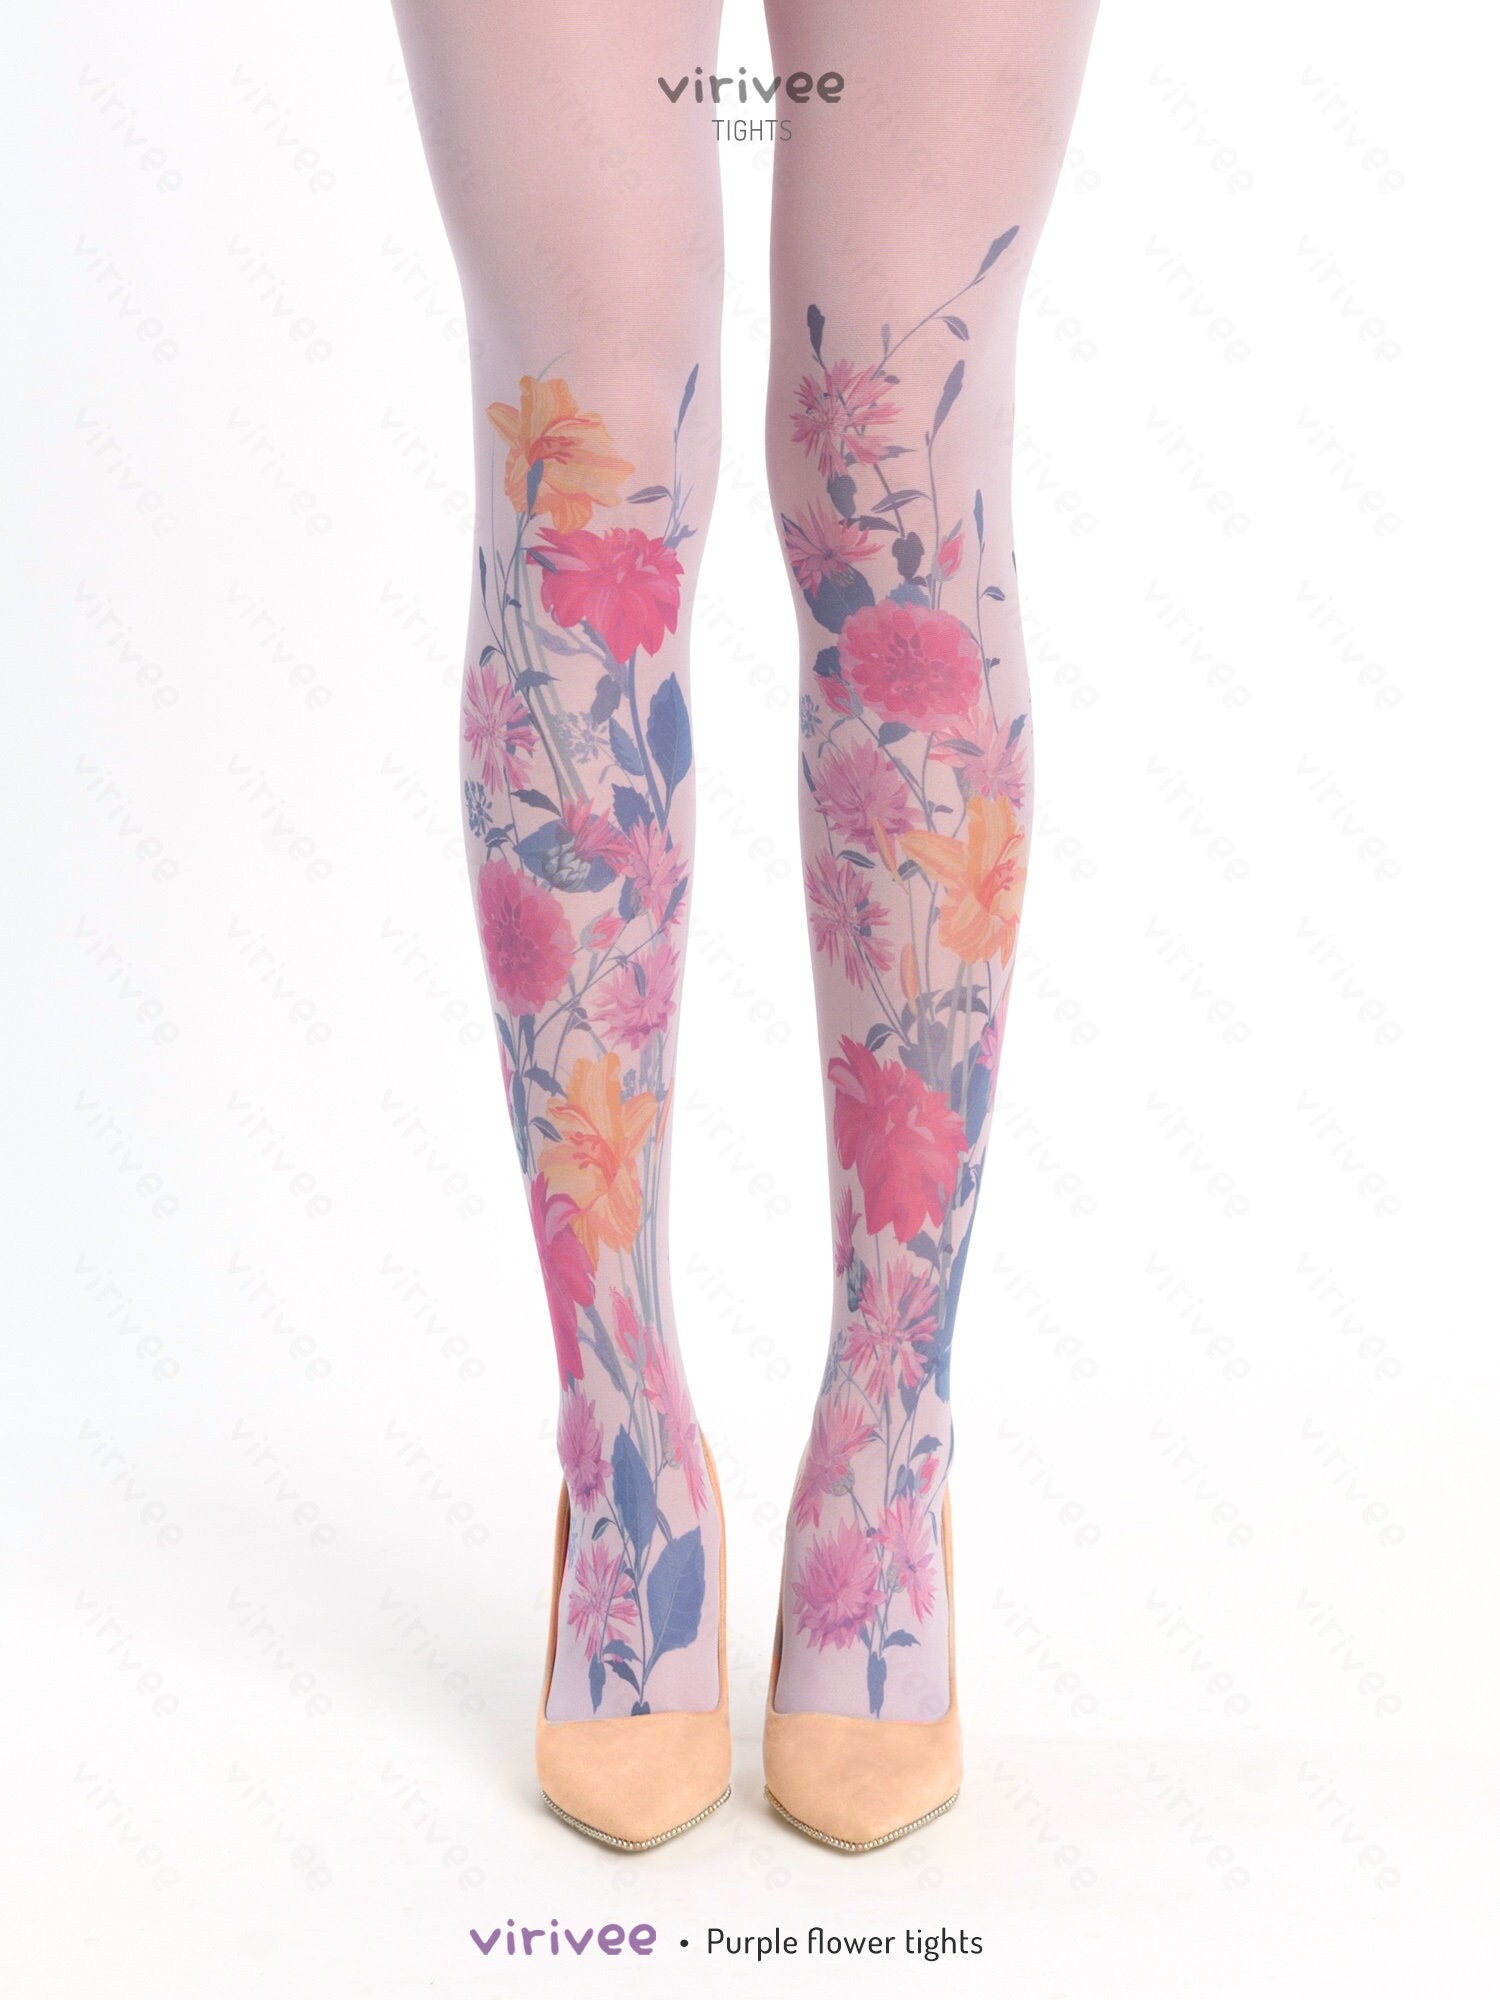 3-pack Floral Fishnet Tights, Patterned Flower Design, Grunge Fairycore  Clothing, All Sizes Plus Pantyhose, Rose Leggings 